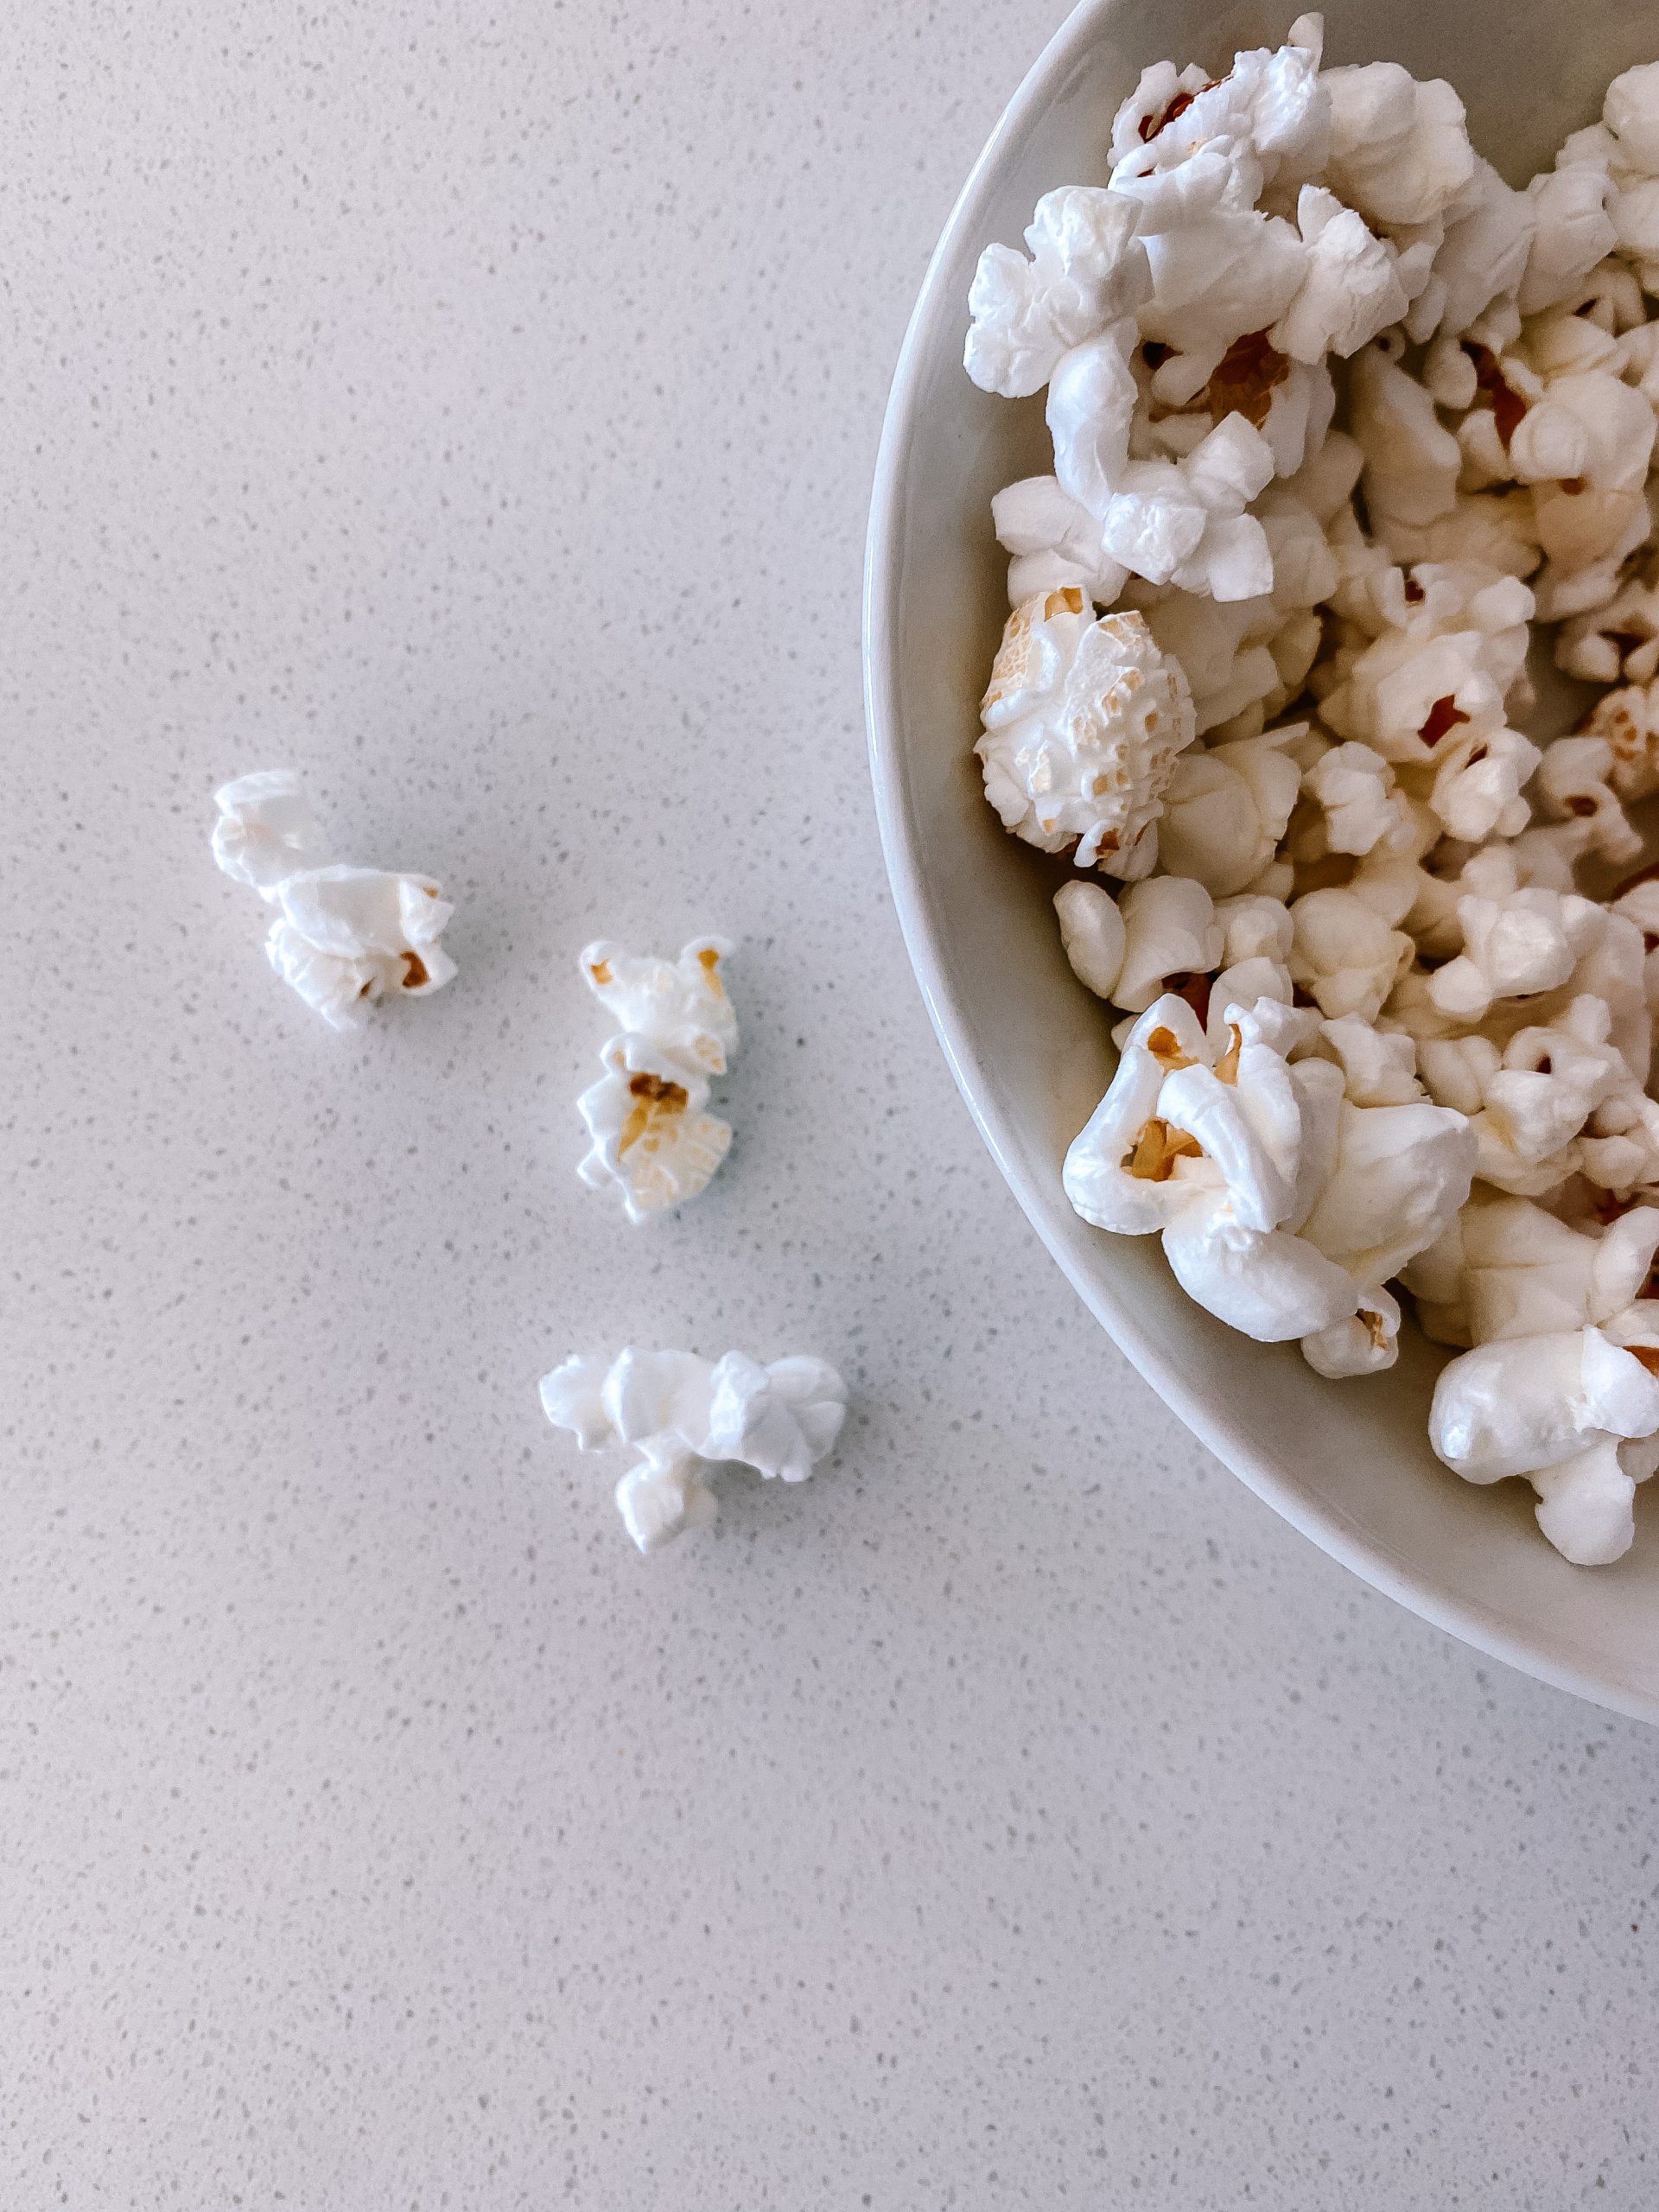 This is hands down the best stovetop popcorn recipe! With the crunchy texture and savory flavor, this tastes like movie theater popcorn, but healthier.